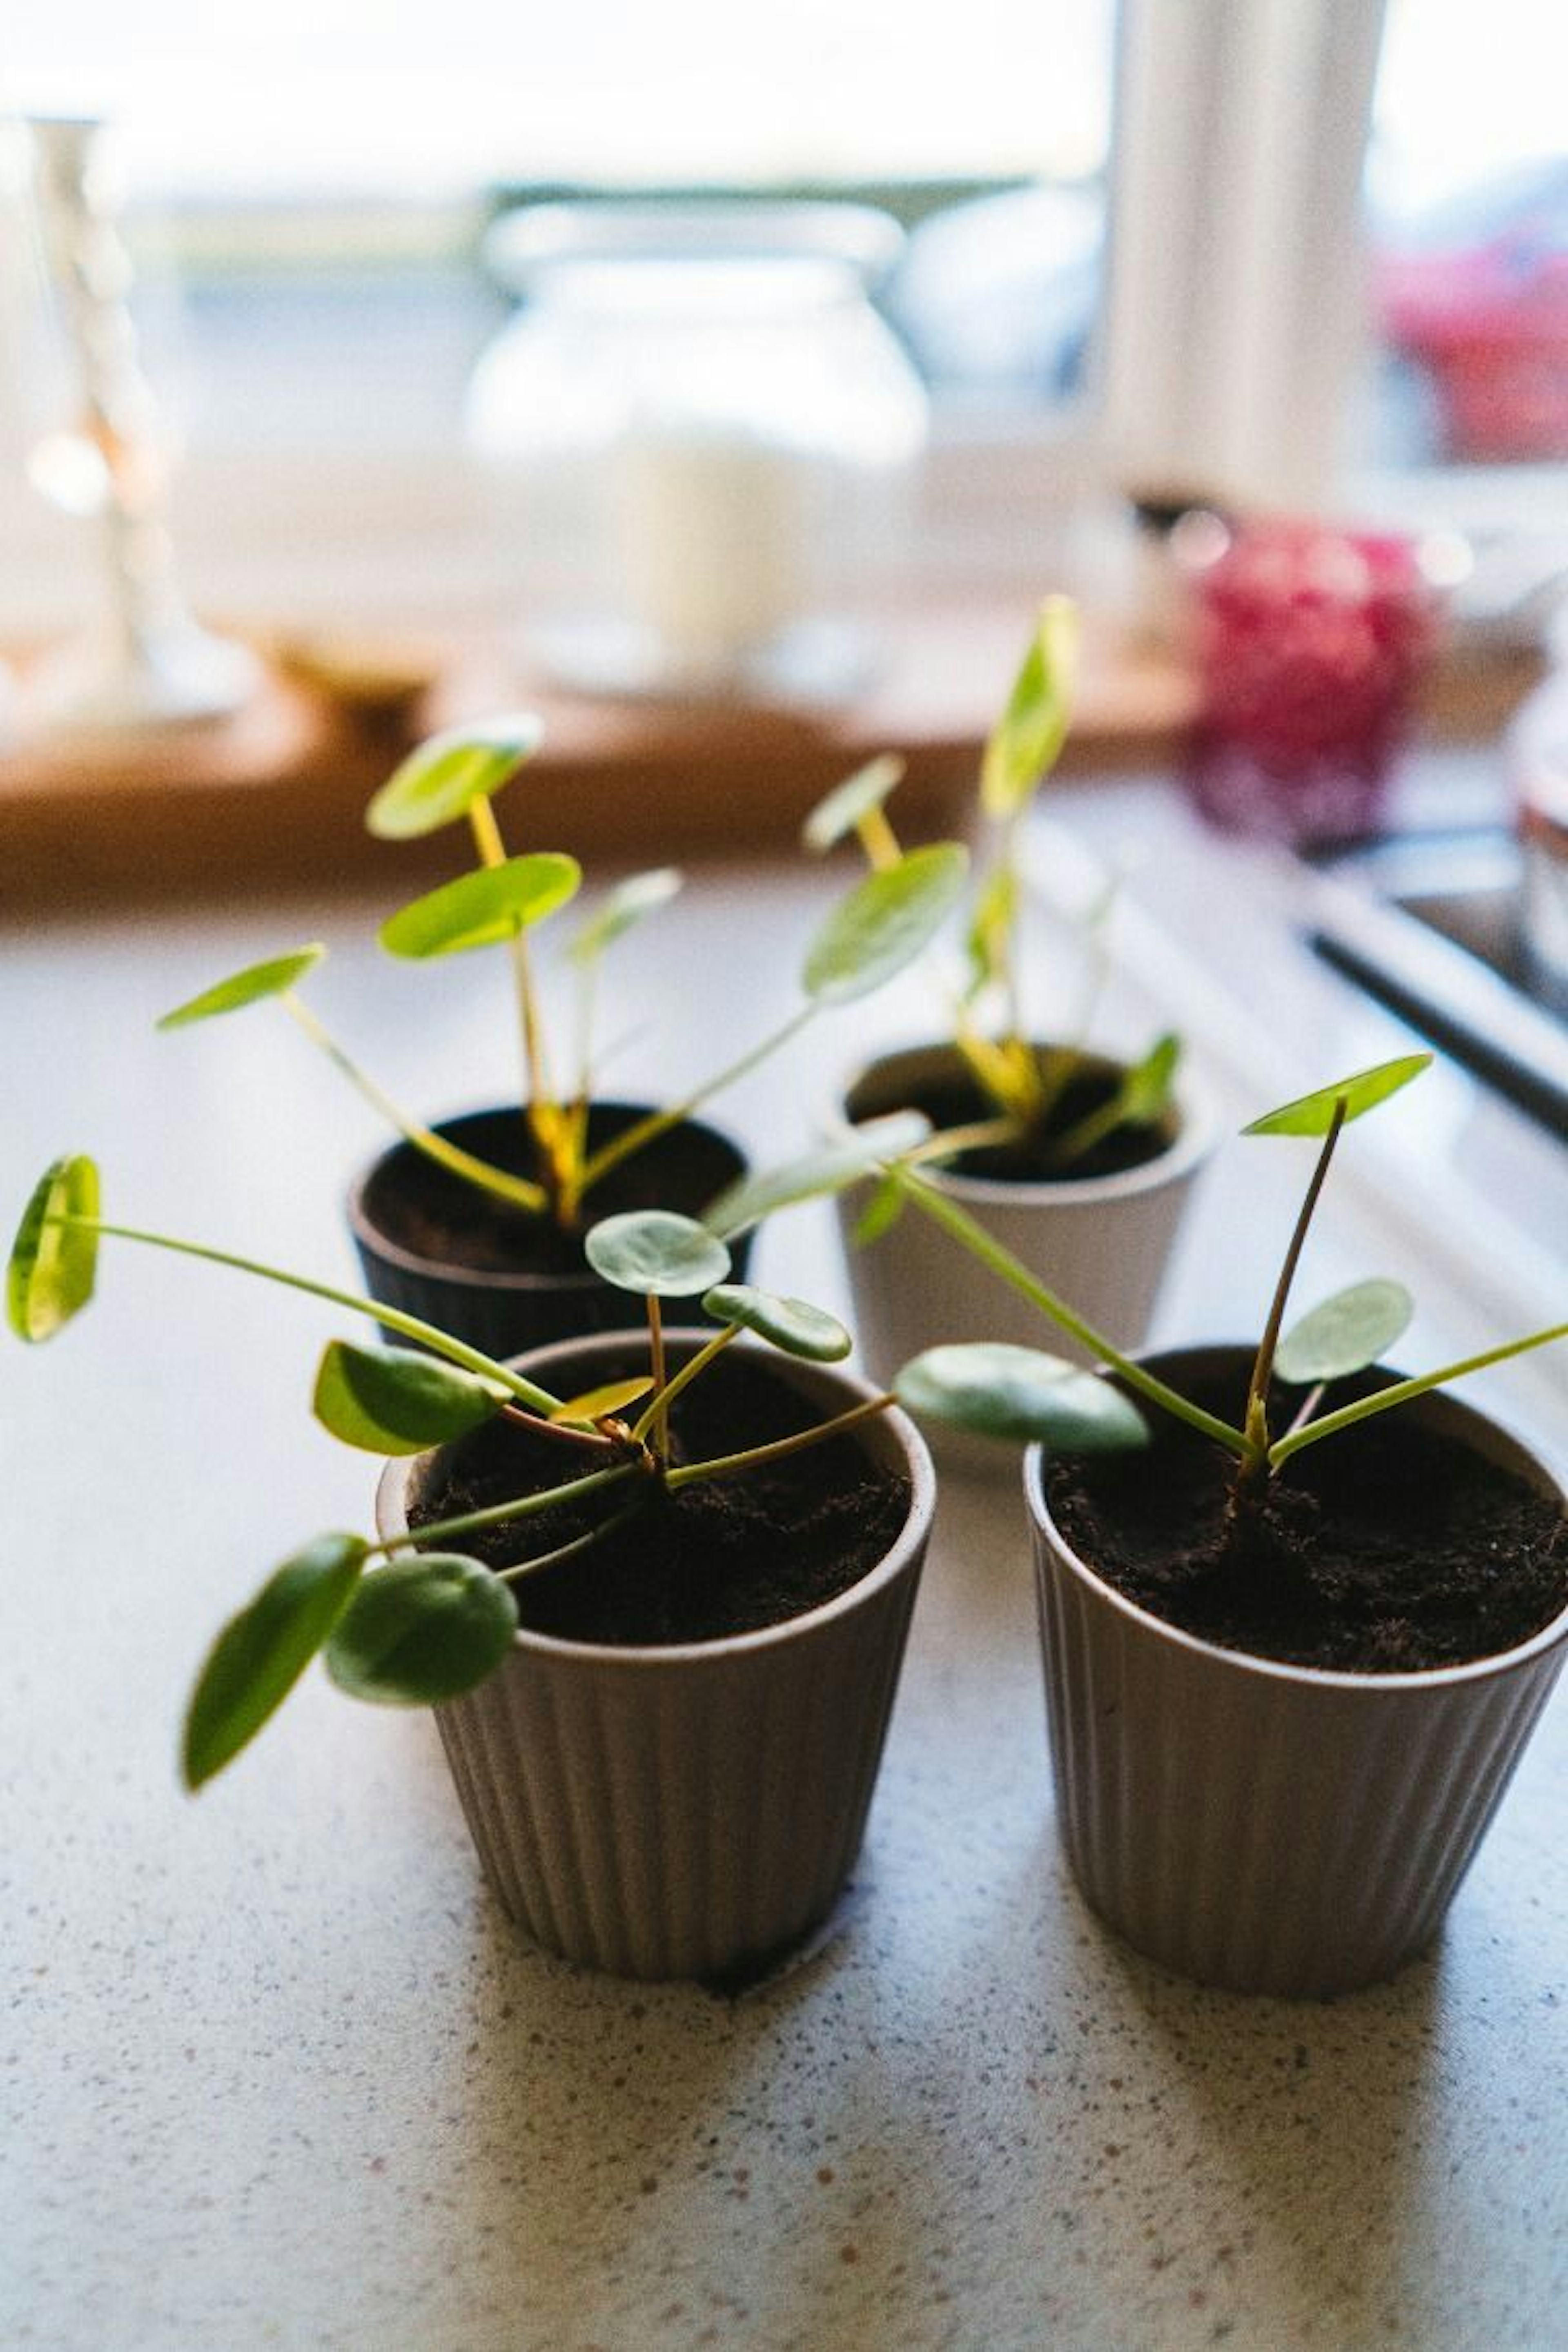 Chinese money plants sprouting in small pots on a countertop in front of a brightly lit window